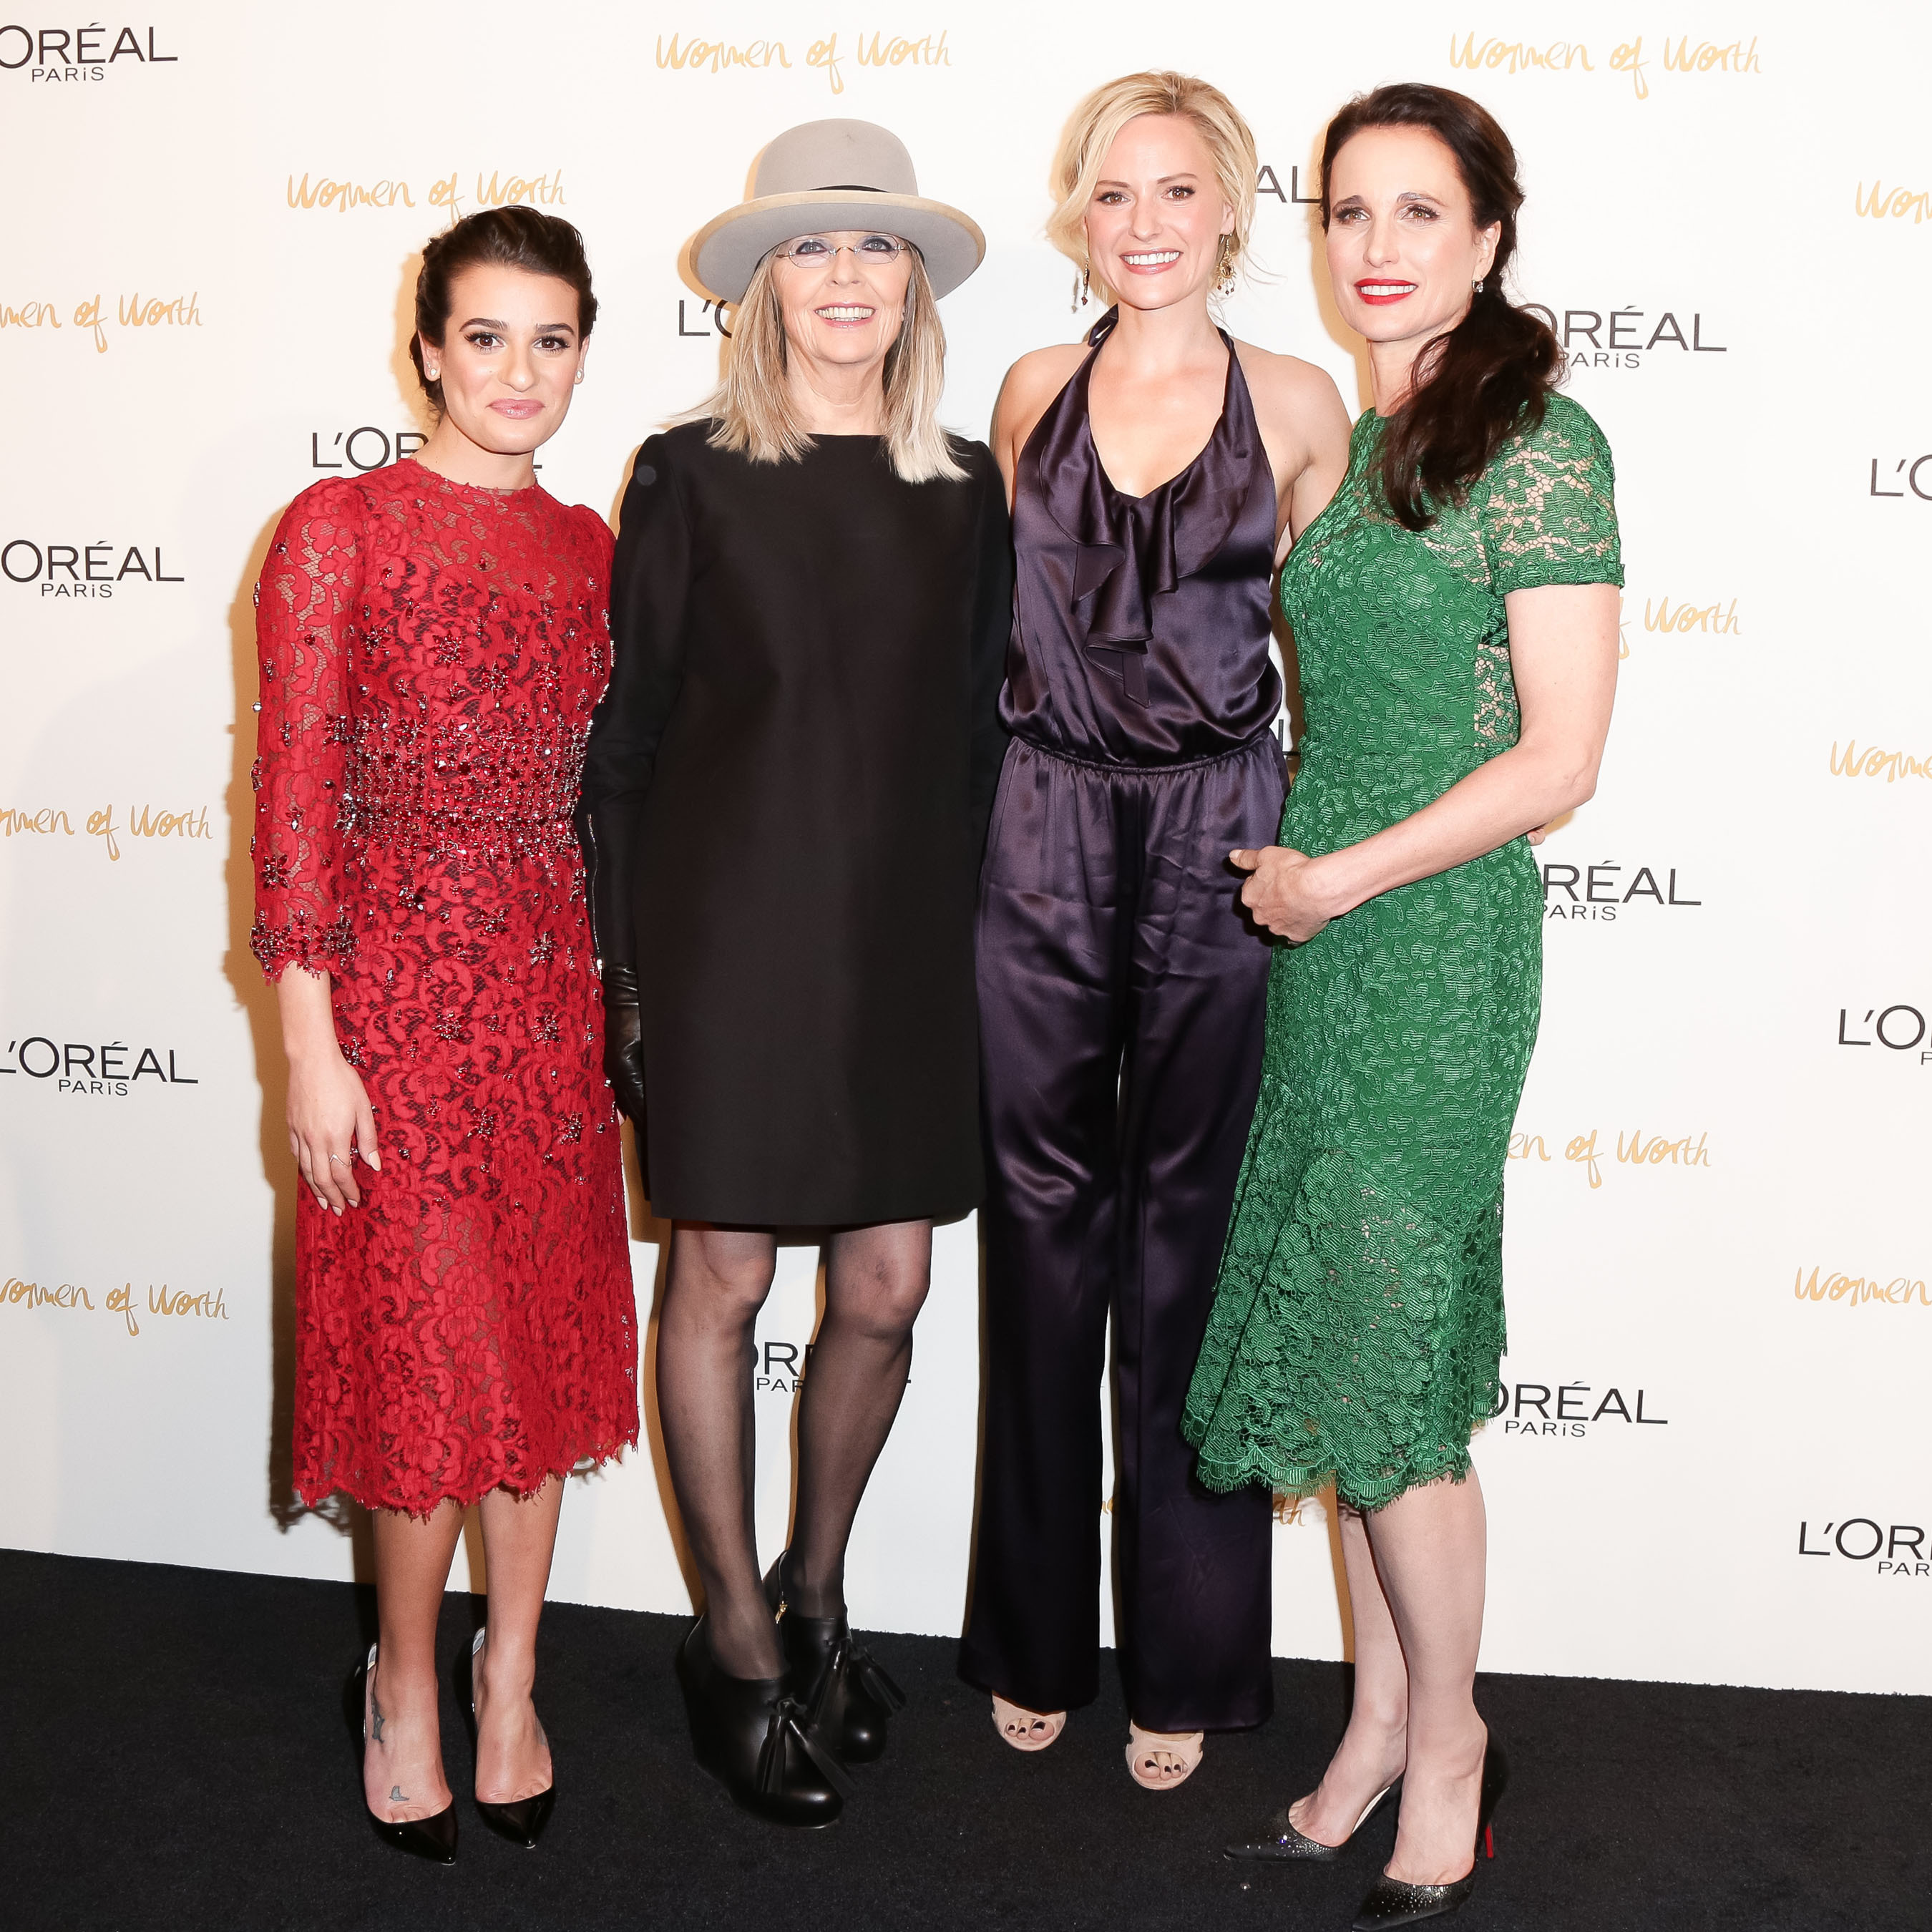 L'Oreal Paris ambassadors Lea Michele, Diane Keaton, Aimee Mullins and Andie MacDowell attend the eighth annual L'Oreal Paris Women of Worth celebration at The Pierre on December 3, 2013 in New York City. (PRNewsFoto/L'Oreal Paris) (PRNewsFoto/L'OREAL PARIS)